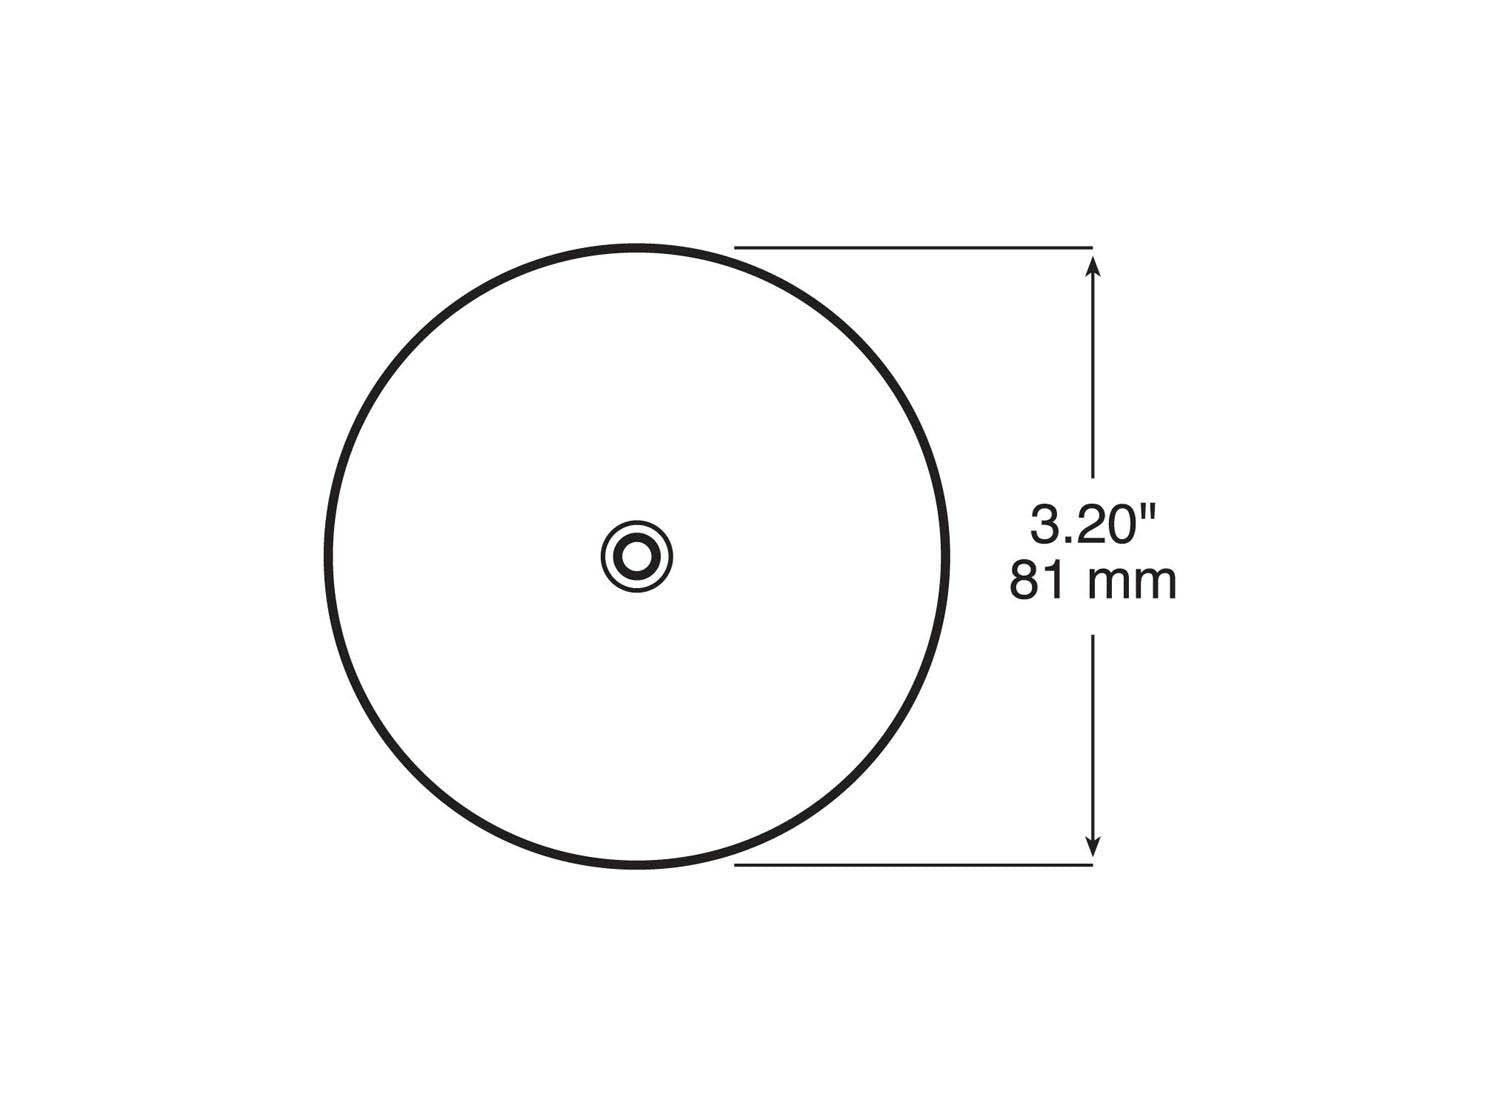 Reflector, Center-Mount, Round, 3.2", bulk pack (Pack of 100) - 476_line_dual_2view-BX5